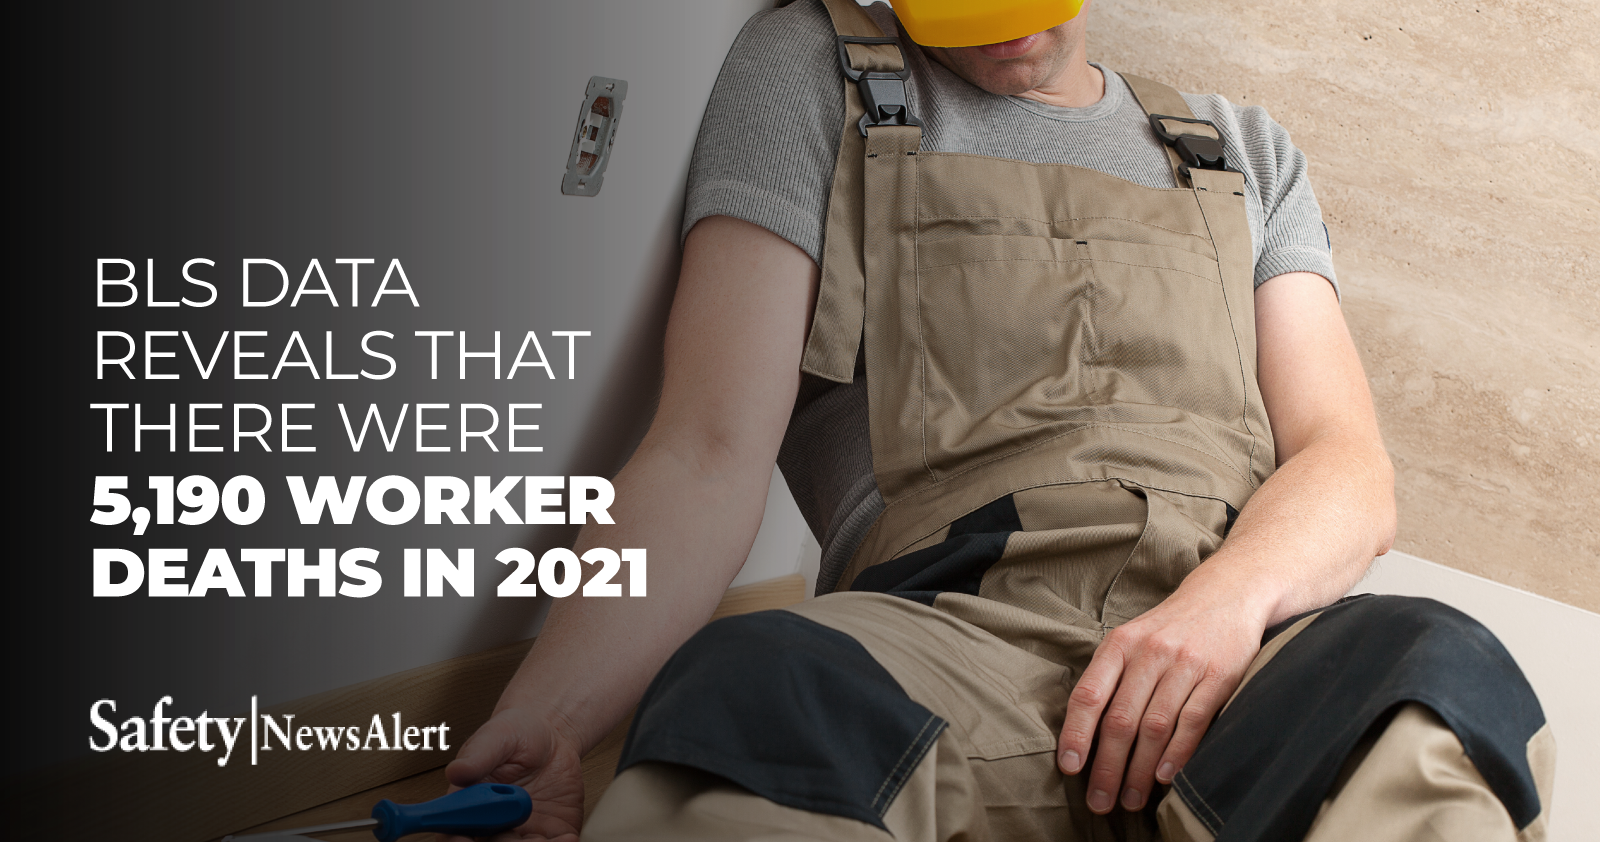 BLS Data Reveals That There Were 5,190 Worker Deaths In 2021